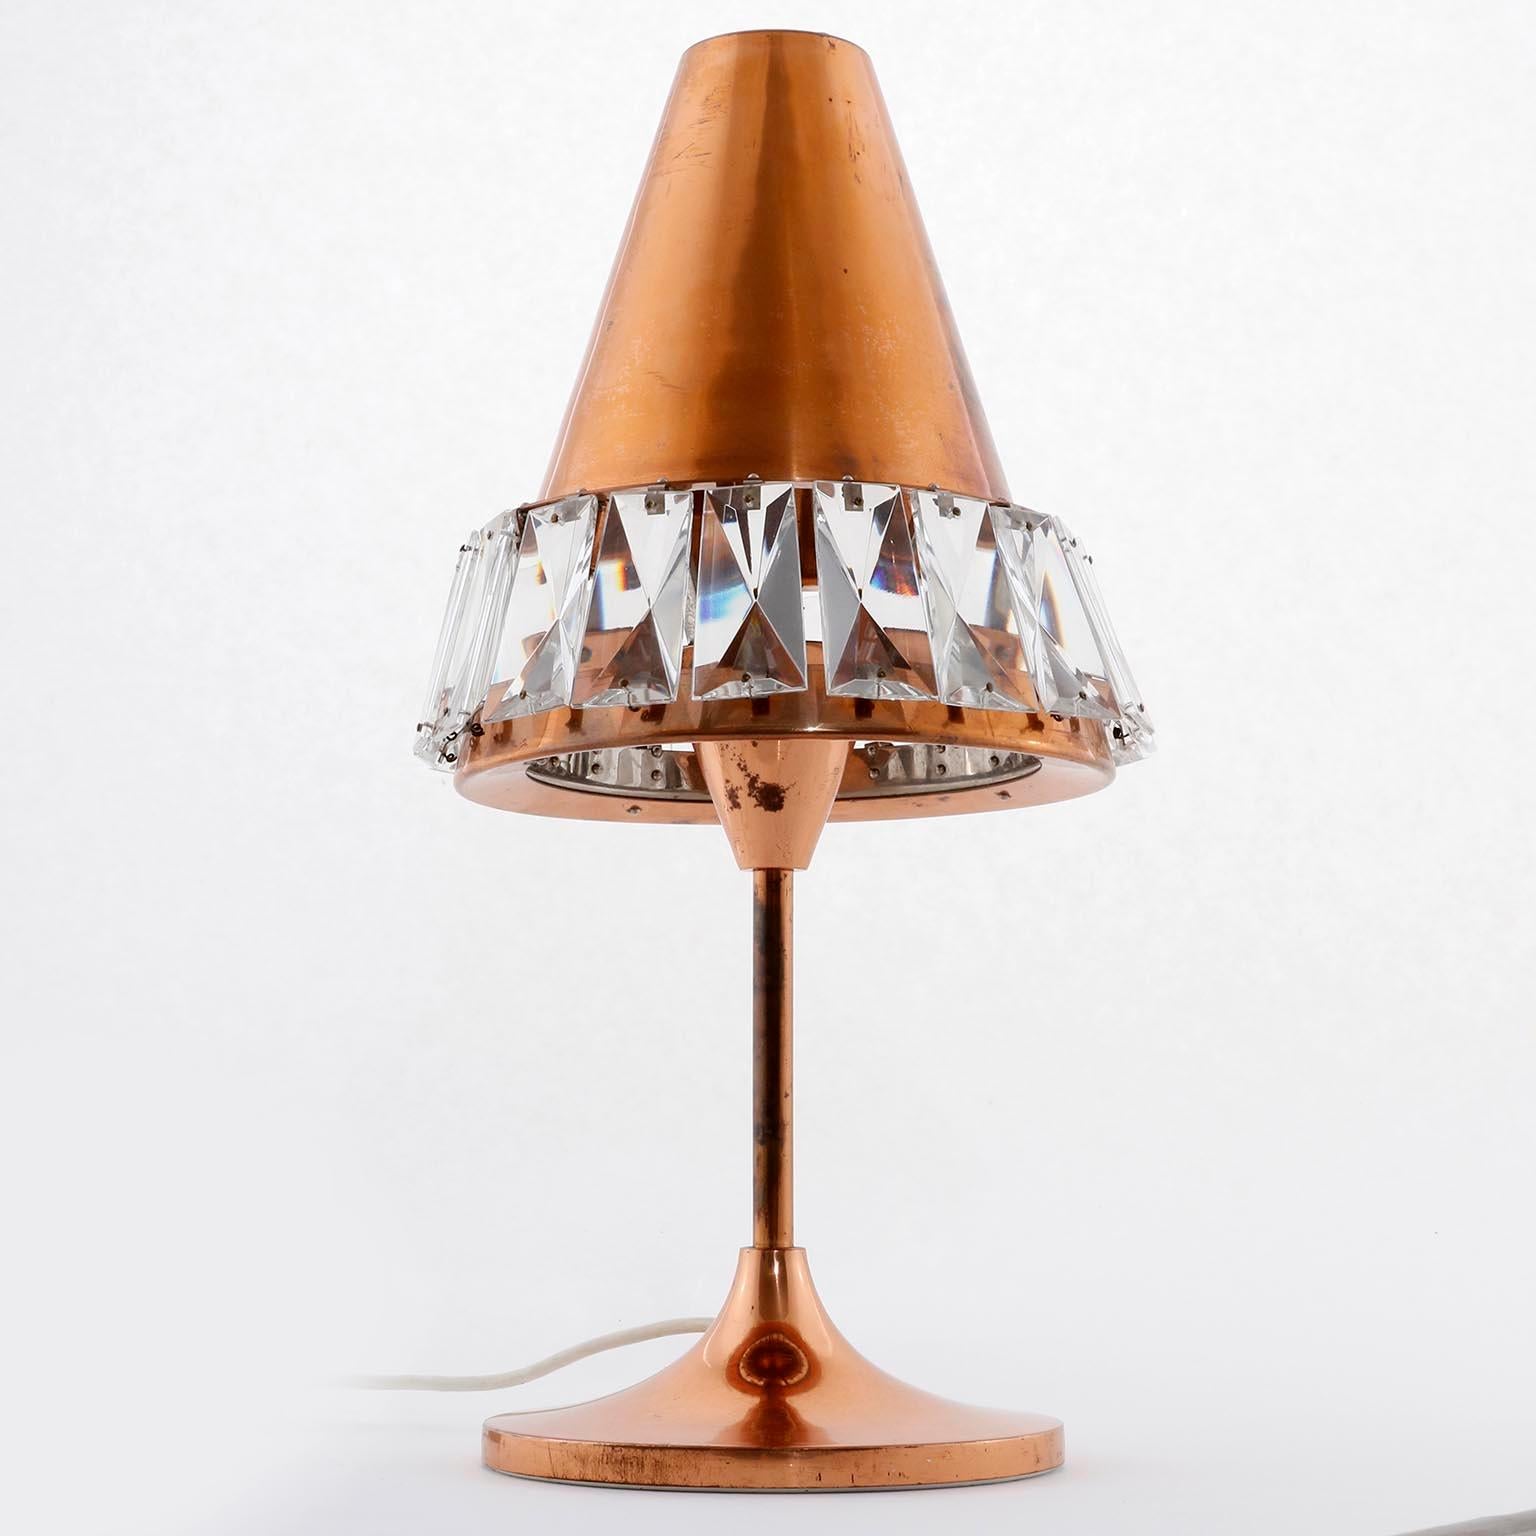 A rare and gorgeous table lamp by Bakalowits & Söhne, Vienna, manufactured in midcentury, circa 1960 (1960s or early 1970).  A cone shaped copper lamp shade with cut crystal glass sits on a stand with tulip base.
Lovely patina on copper. A few parts